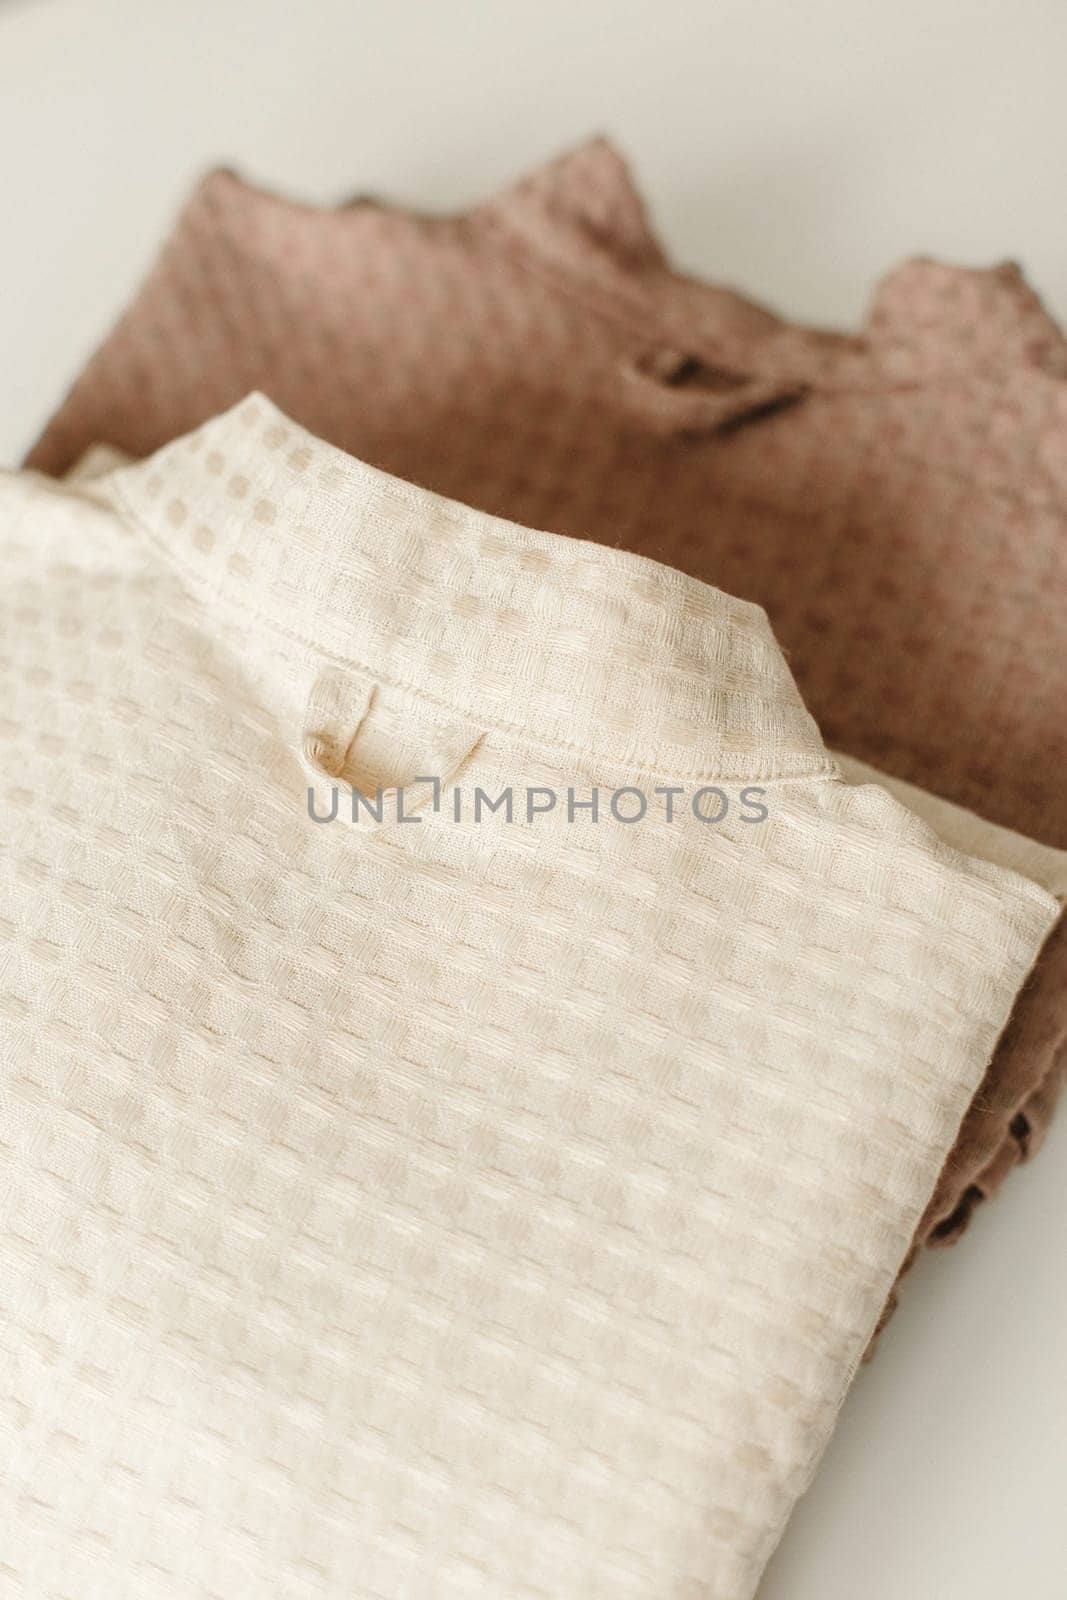 Linen bathrobe is folded, lies on the table. Close-up